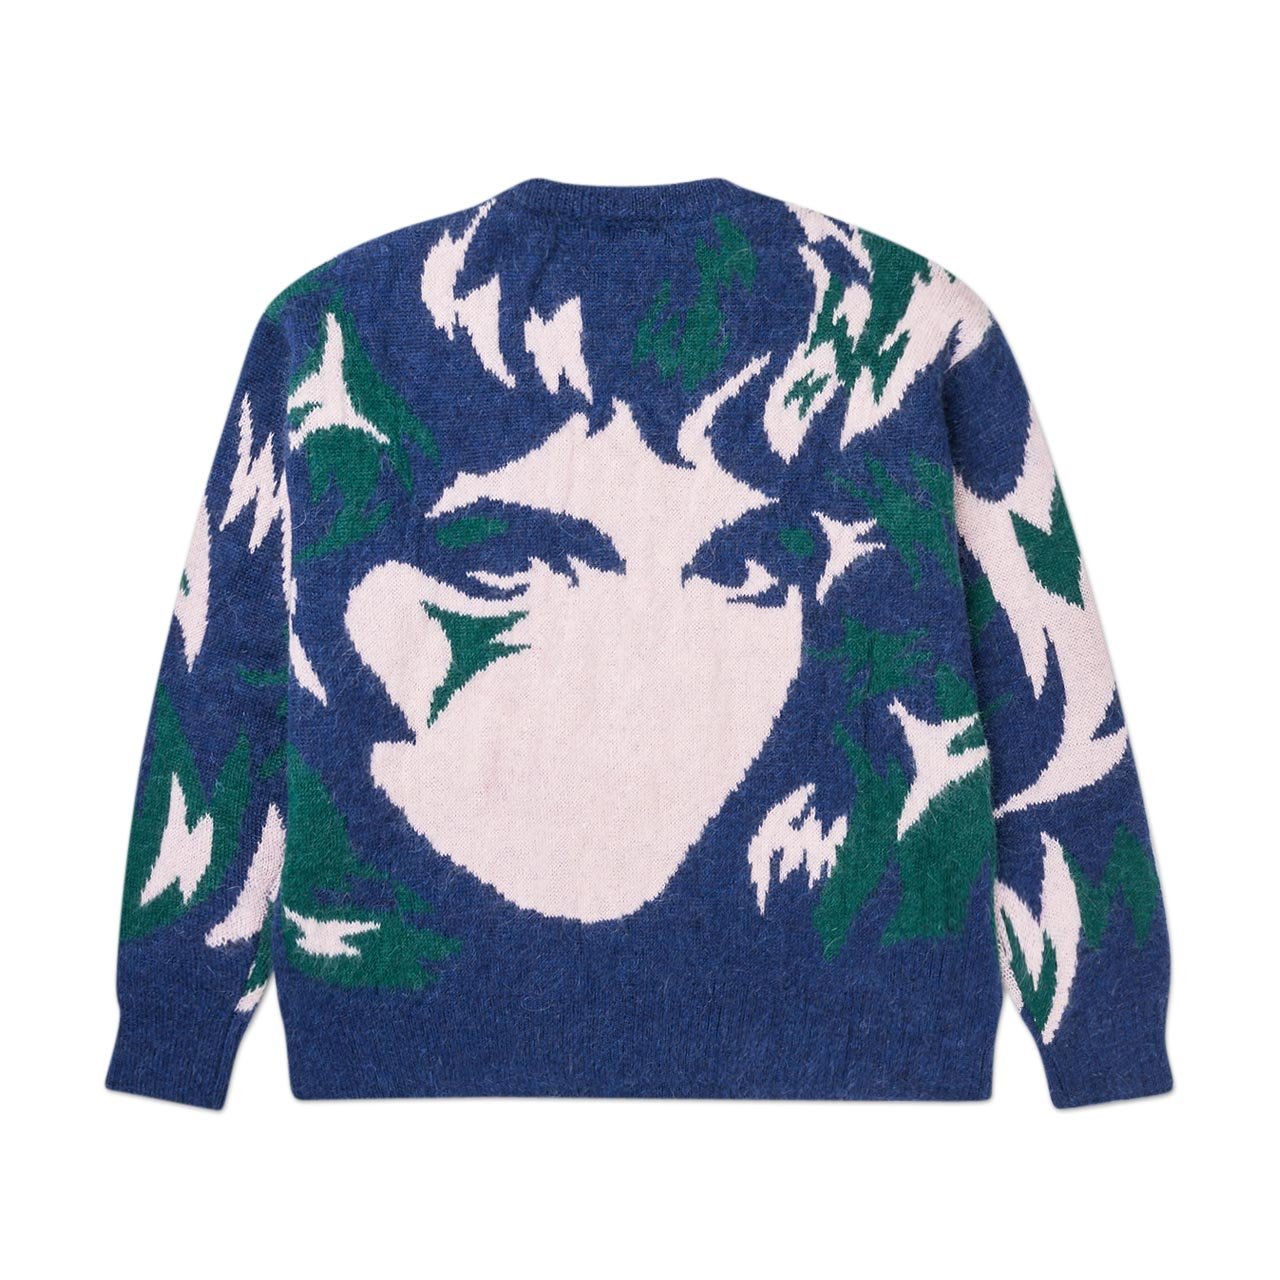 perks and mini handmaiden camo sweater (navy) - 8572-n - a.plus - Image - 2